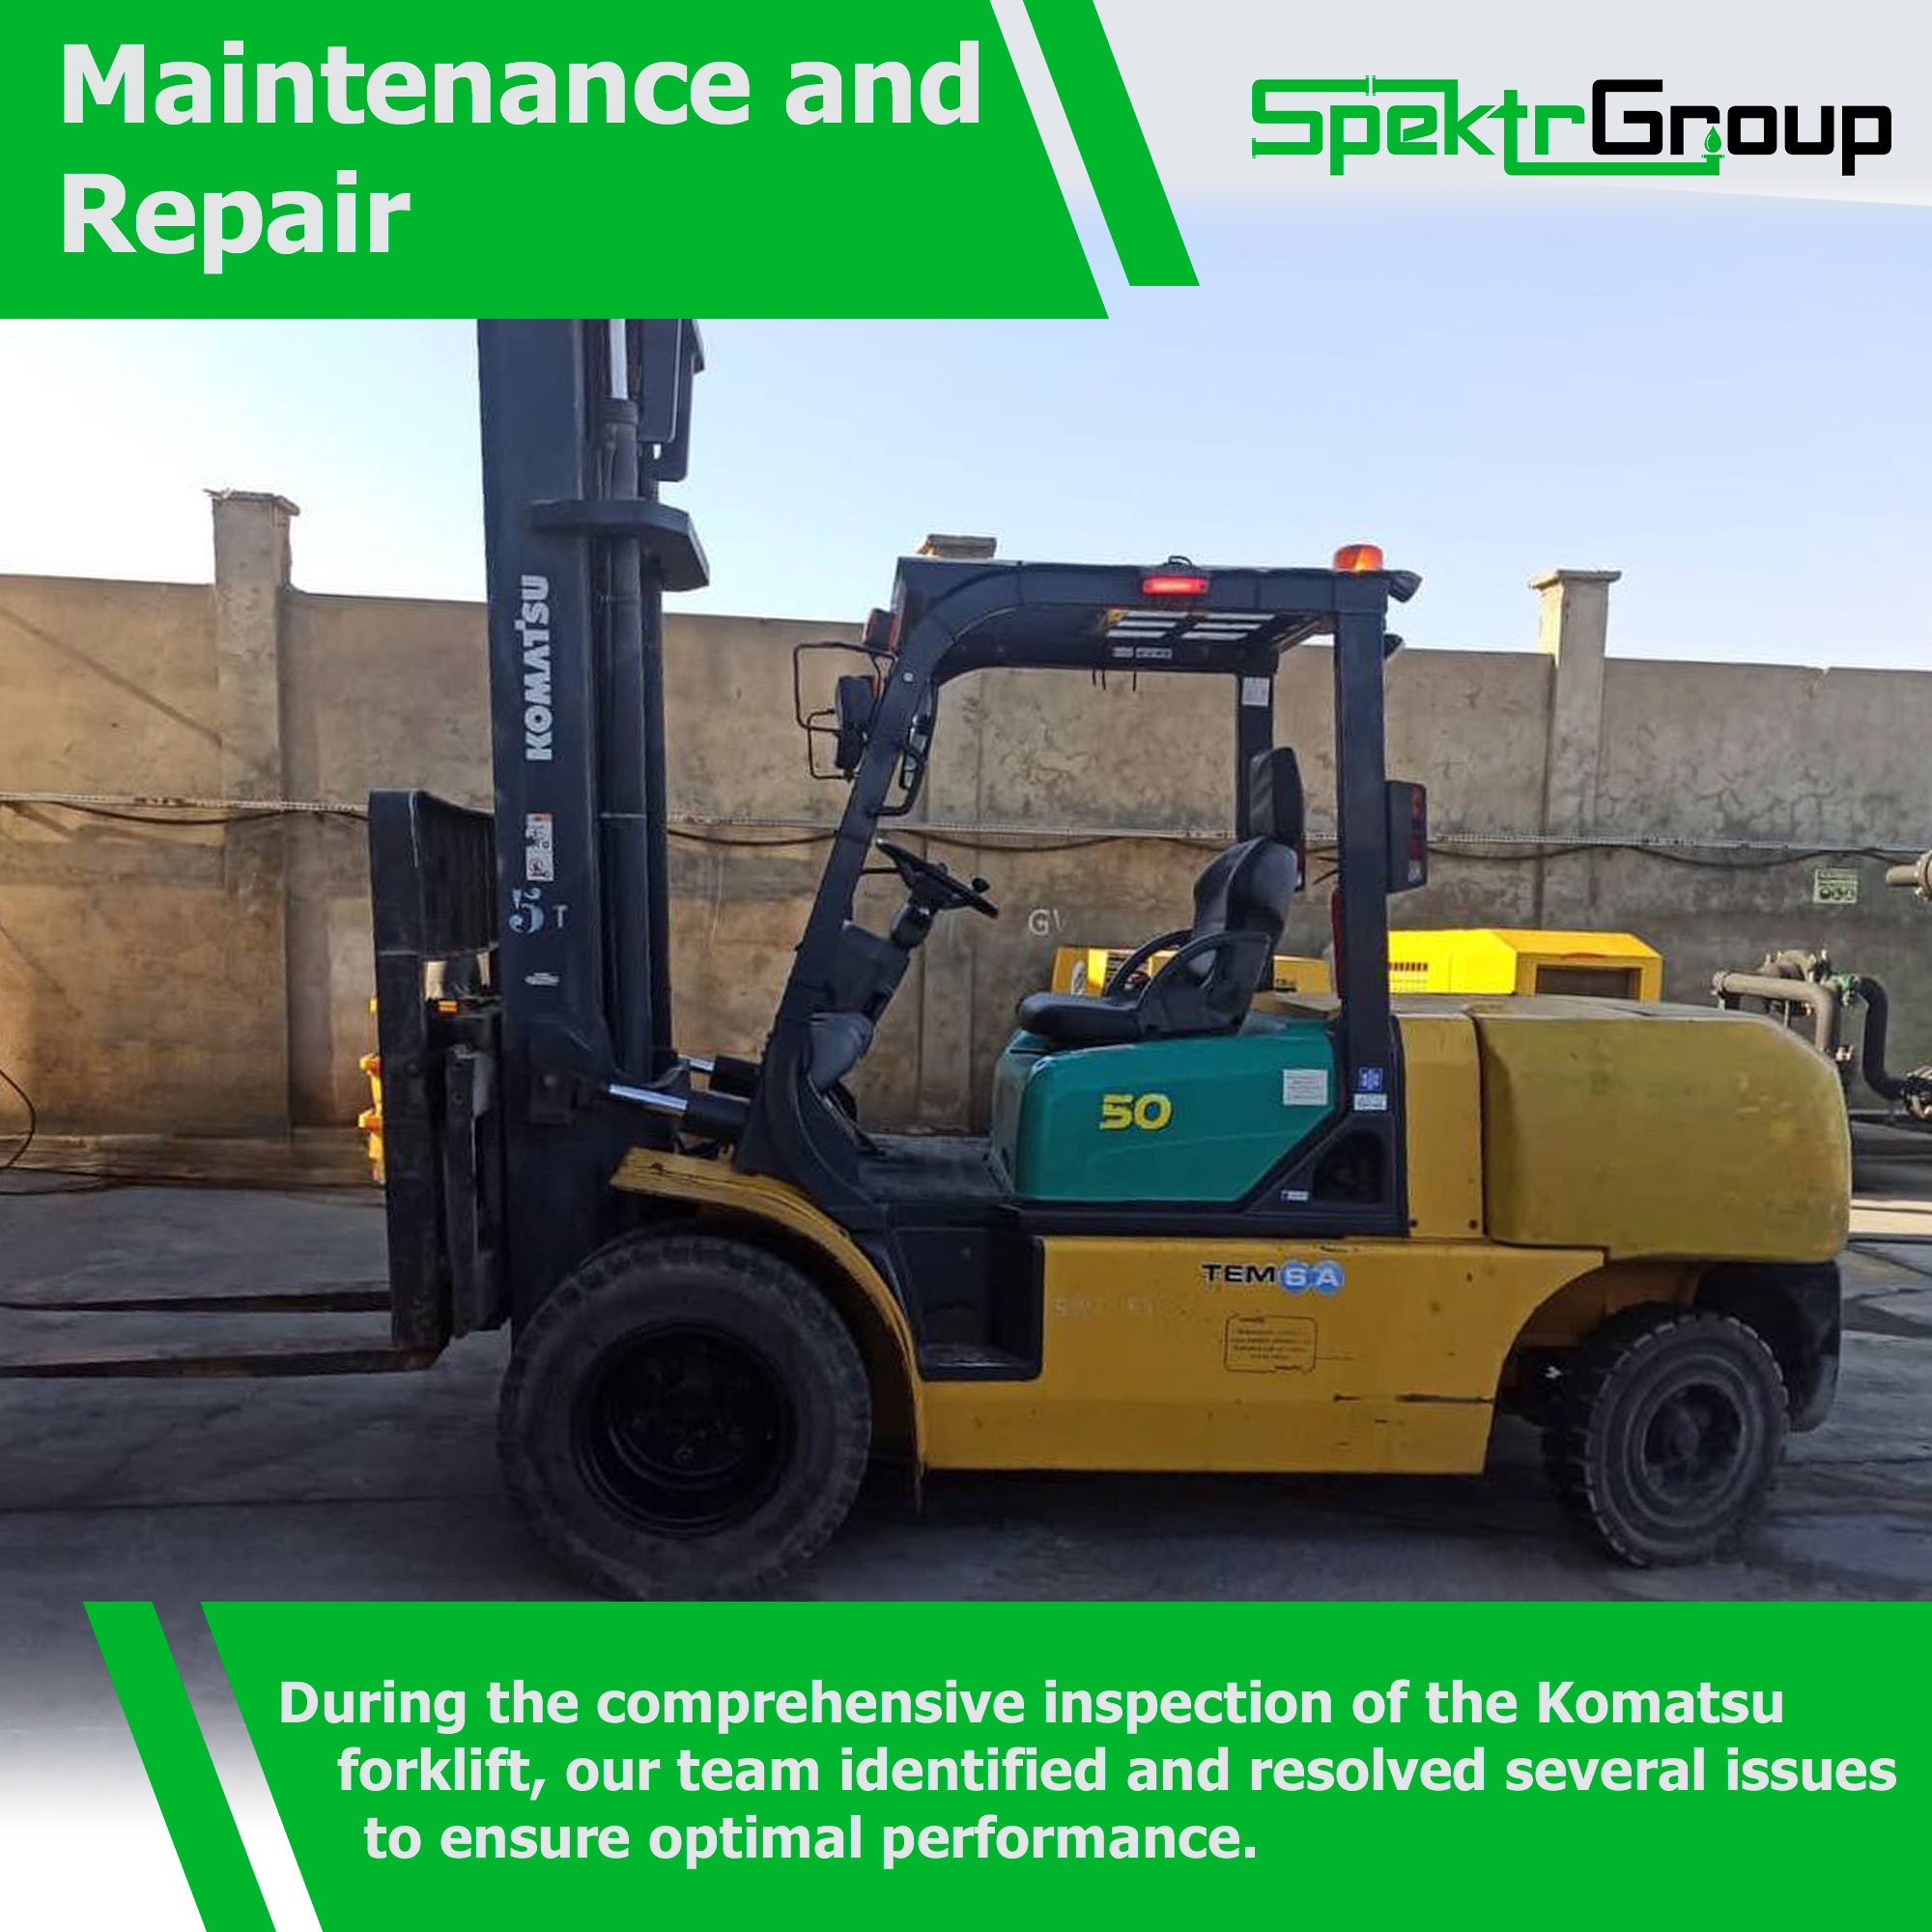 You are currently viewing Maintenance and Repair of Komatsu Forklift